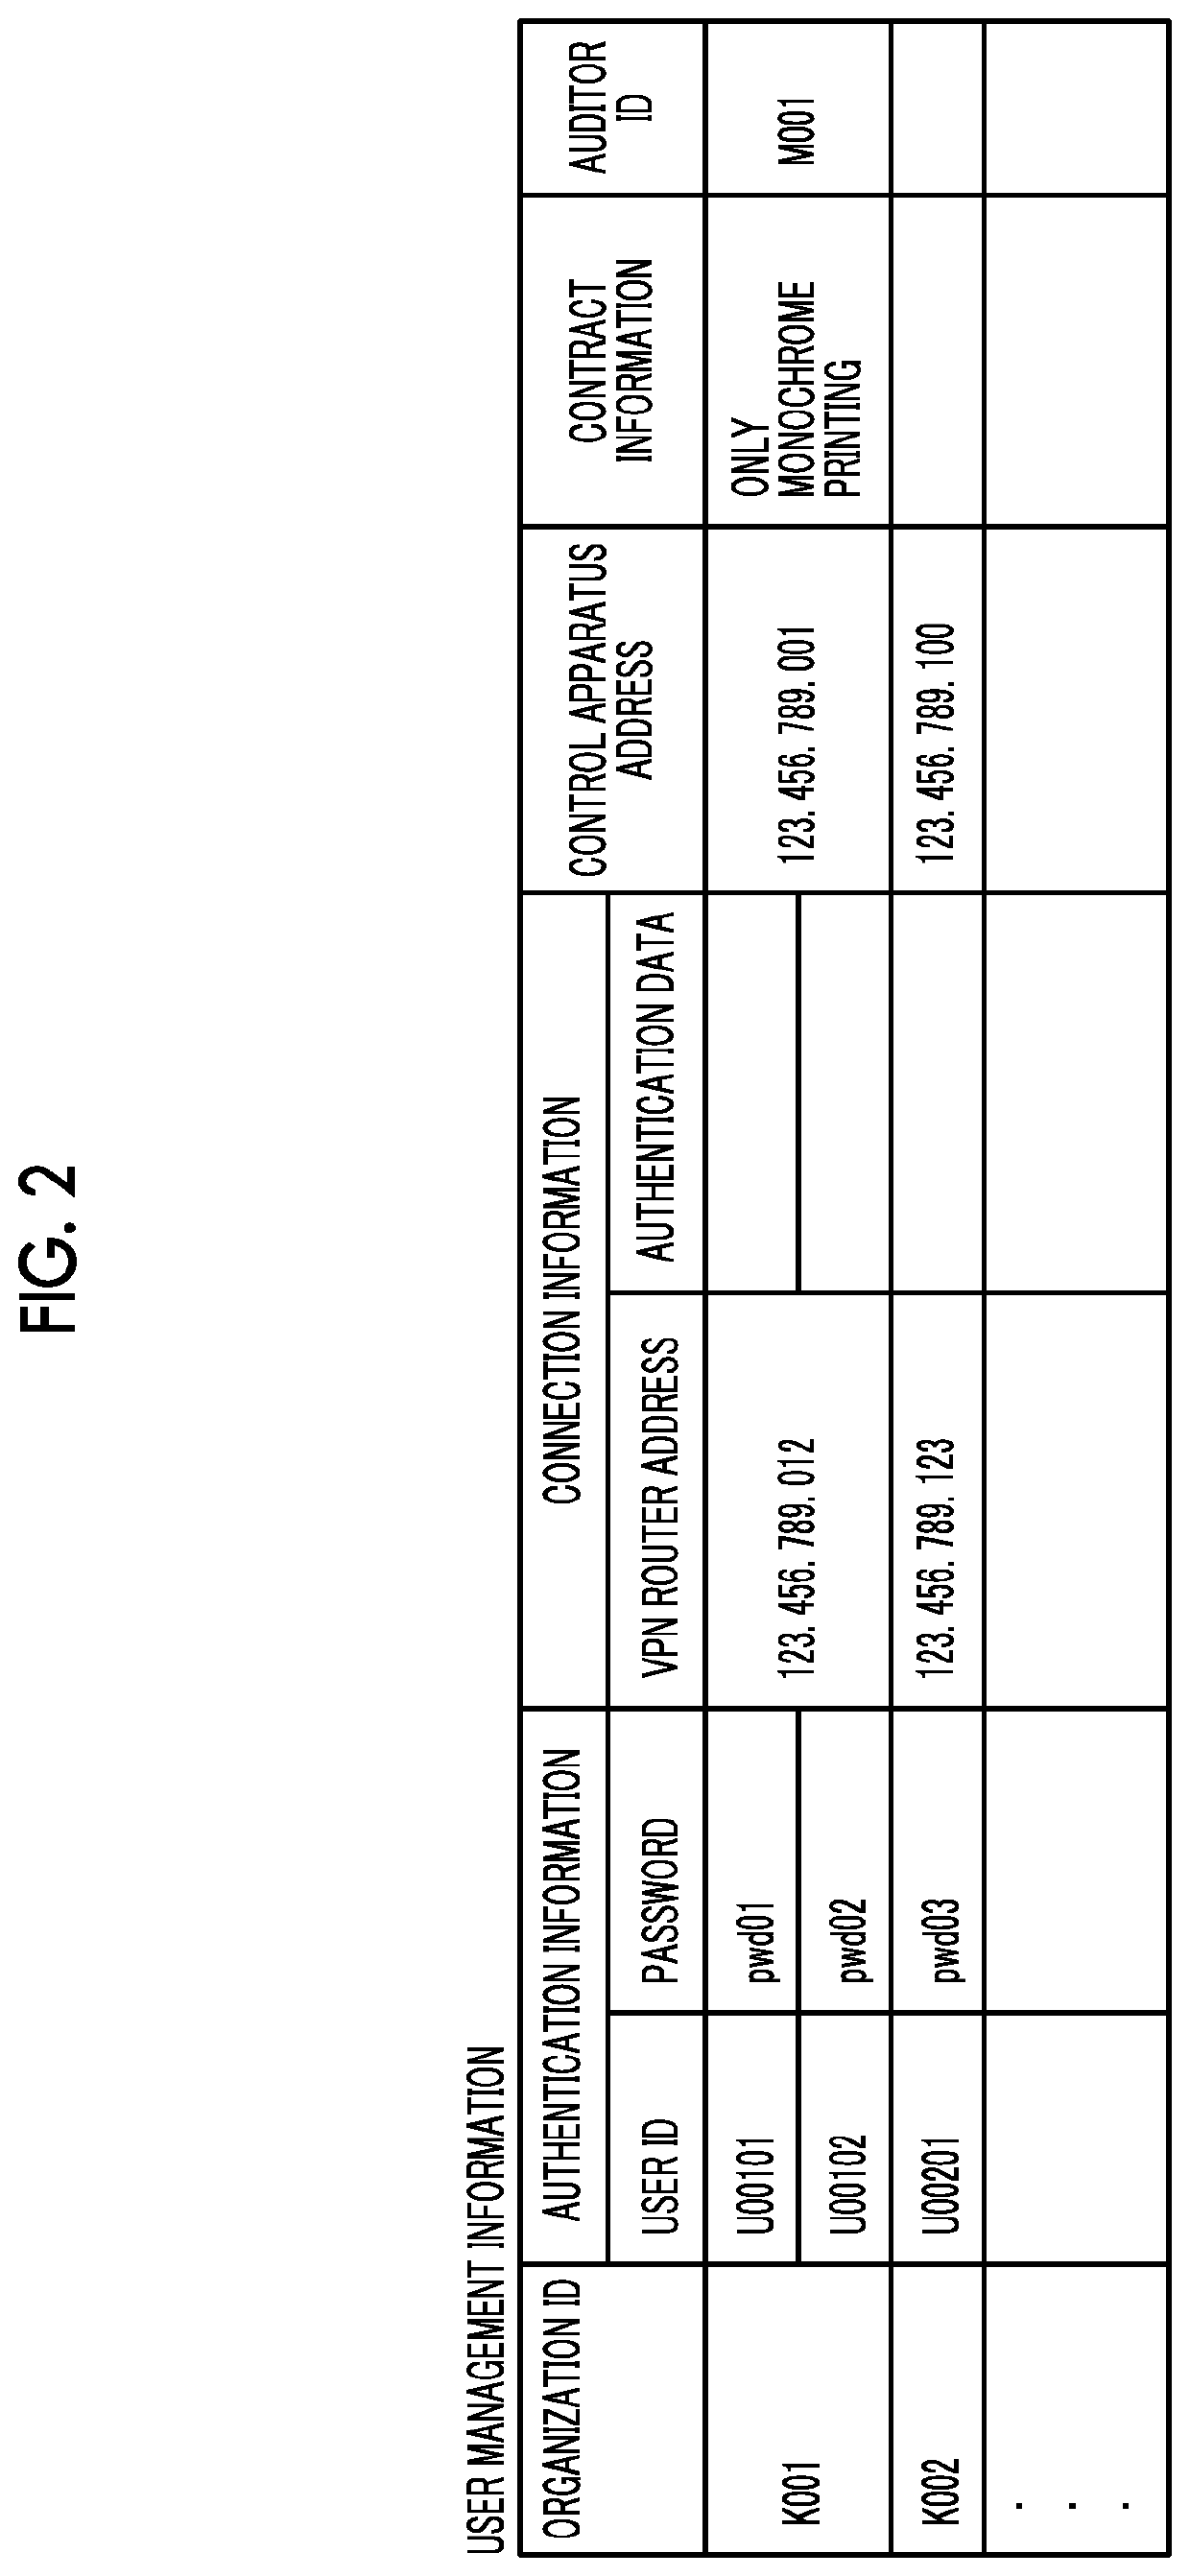 Image processing system and non-transitory computer readable medium storing program